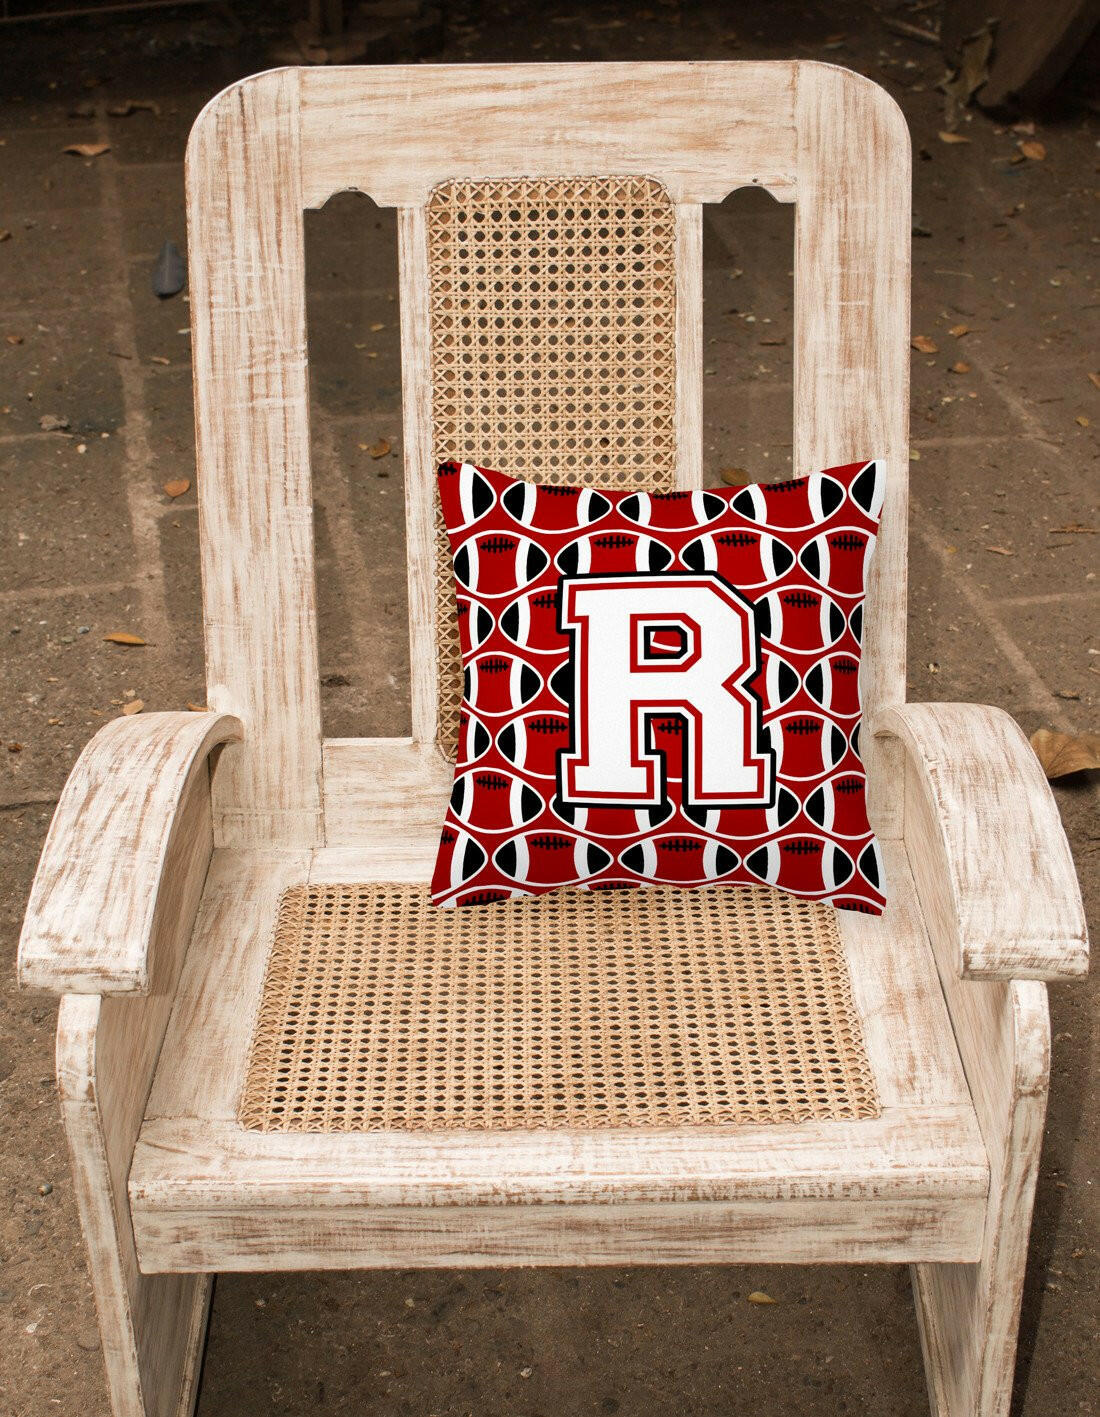 Letter R Football Cardinal and White Fabric Decorative Pillow CJ1082-RPW1414 by Caroline's Treasures